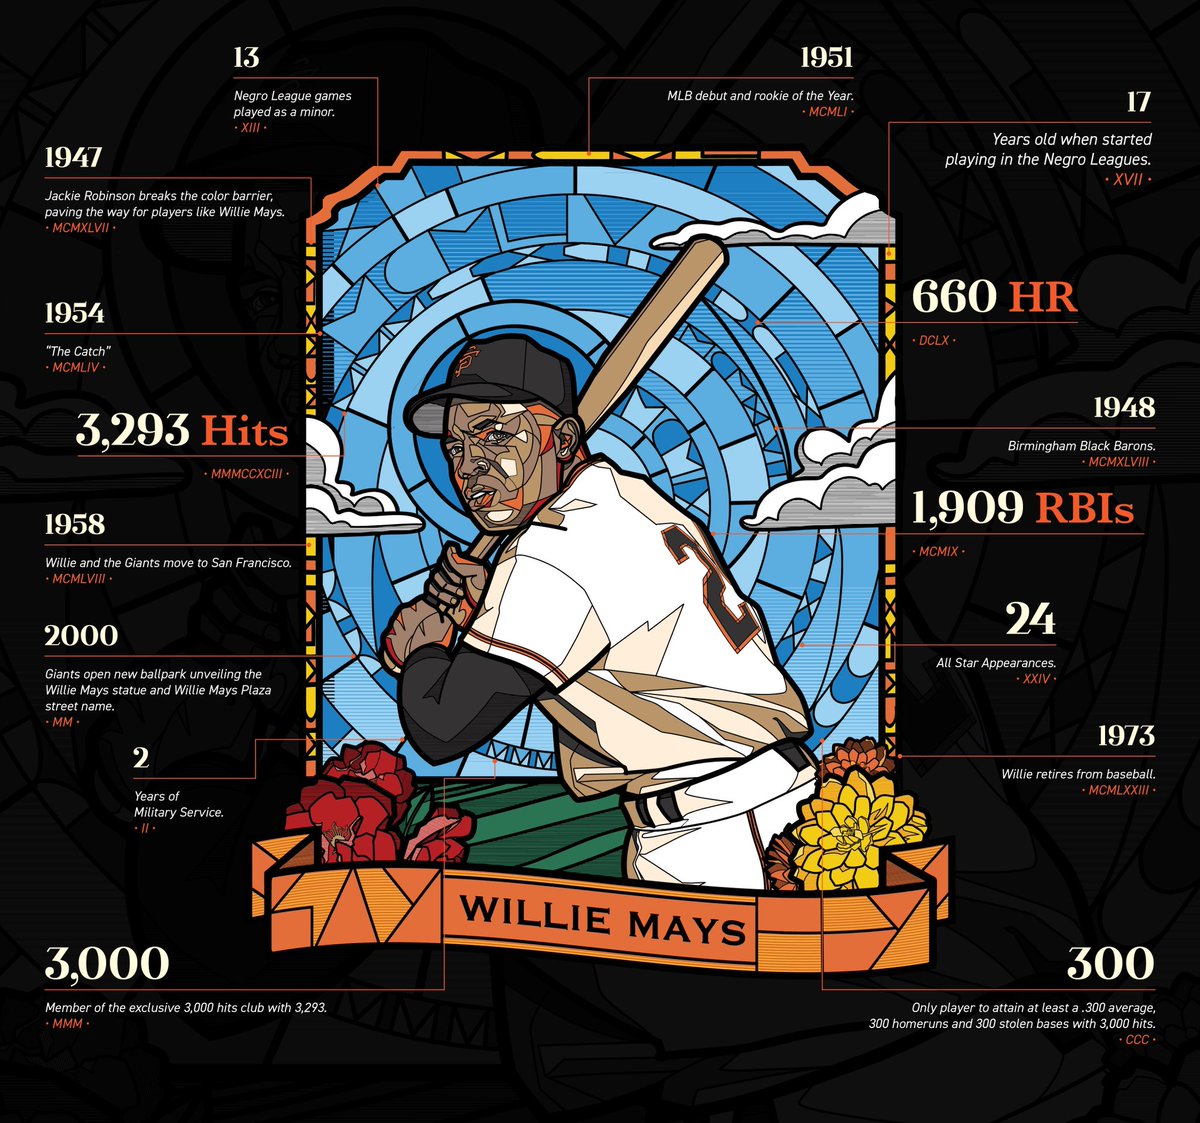 Leading up to @MLB at Rickwood Field, the #SFGiants collaborated with @Rob_Zilla_III to develop original artwork celebrating Giants baseball, Willie Mays, and the rich history of the Negro Leagues. The Giants will release a variety of new apparel featuring Rob Zilla’s designs